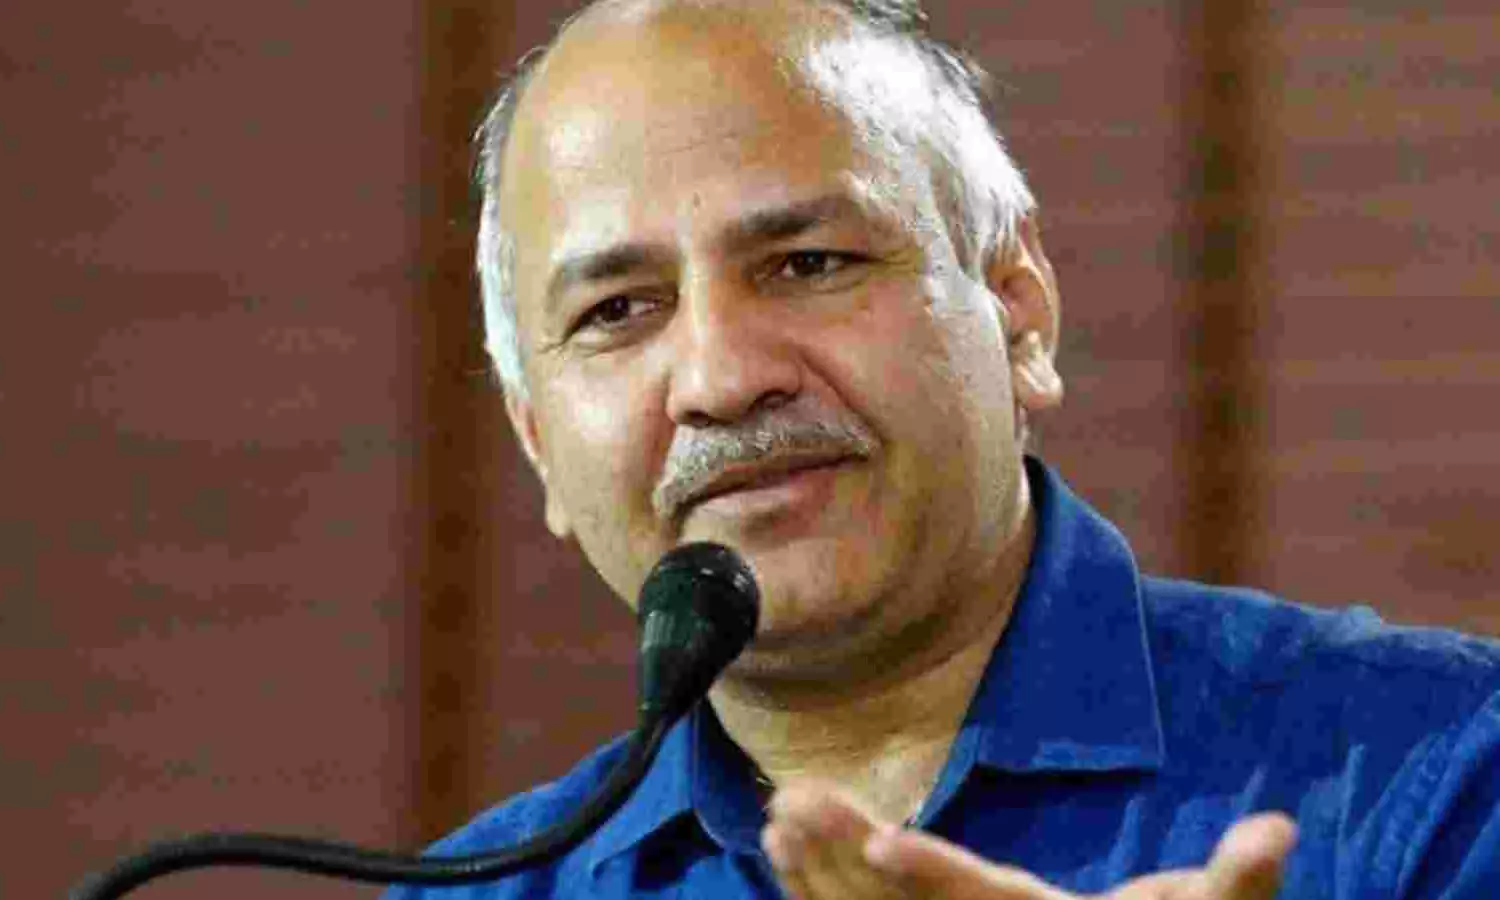 Manish Sisodia to be produced in court today. Top 10 updates